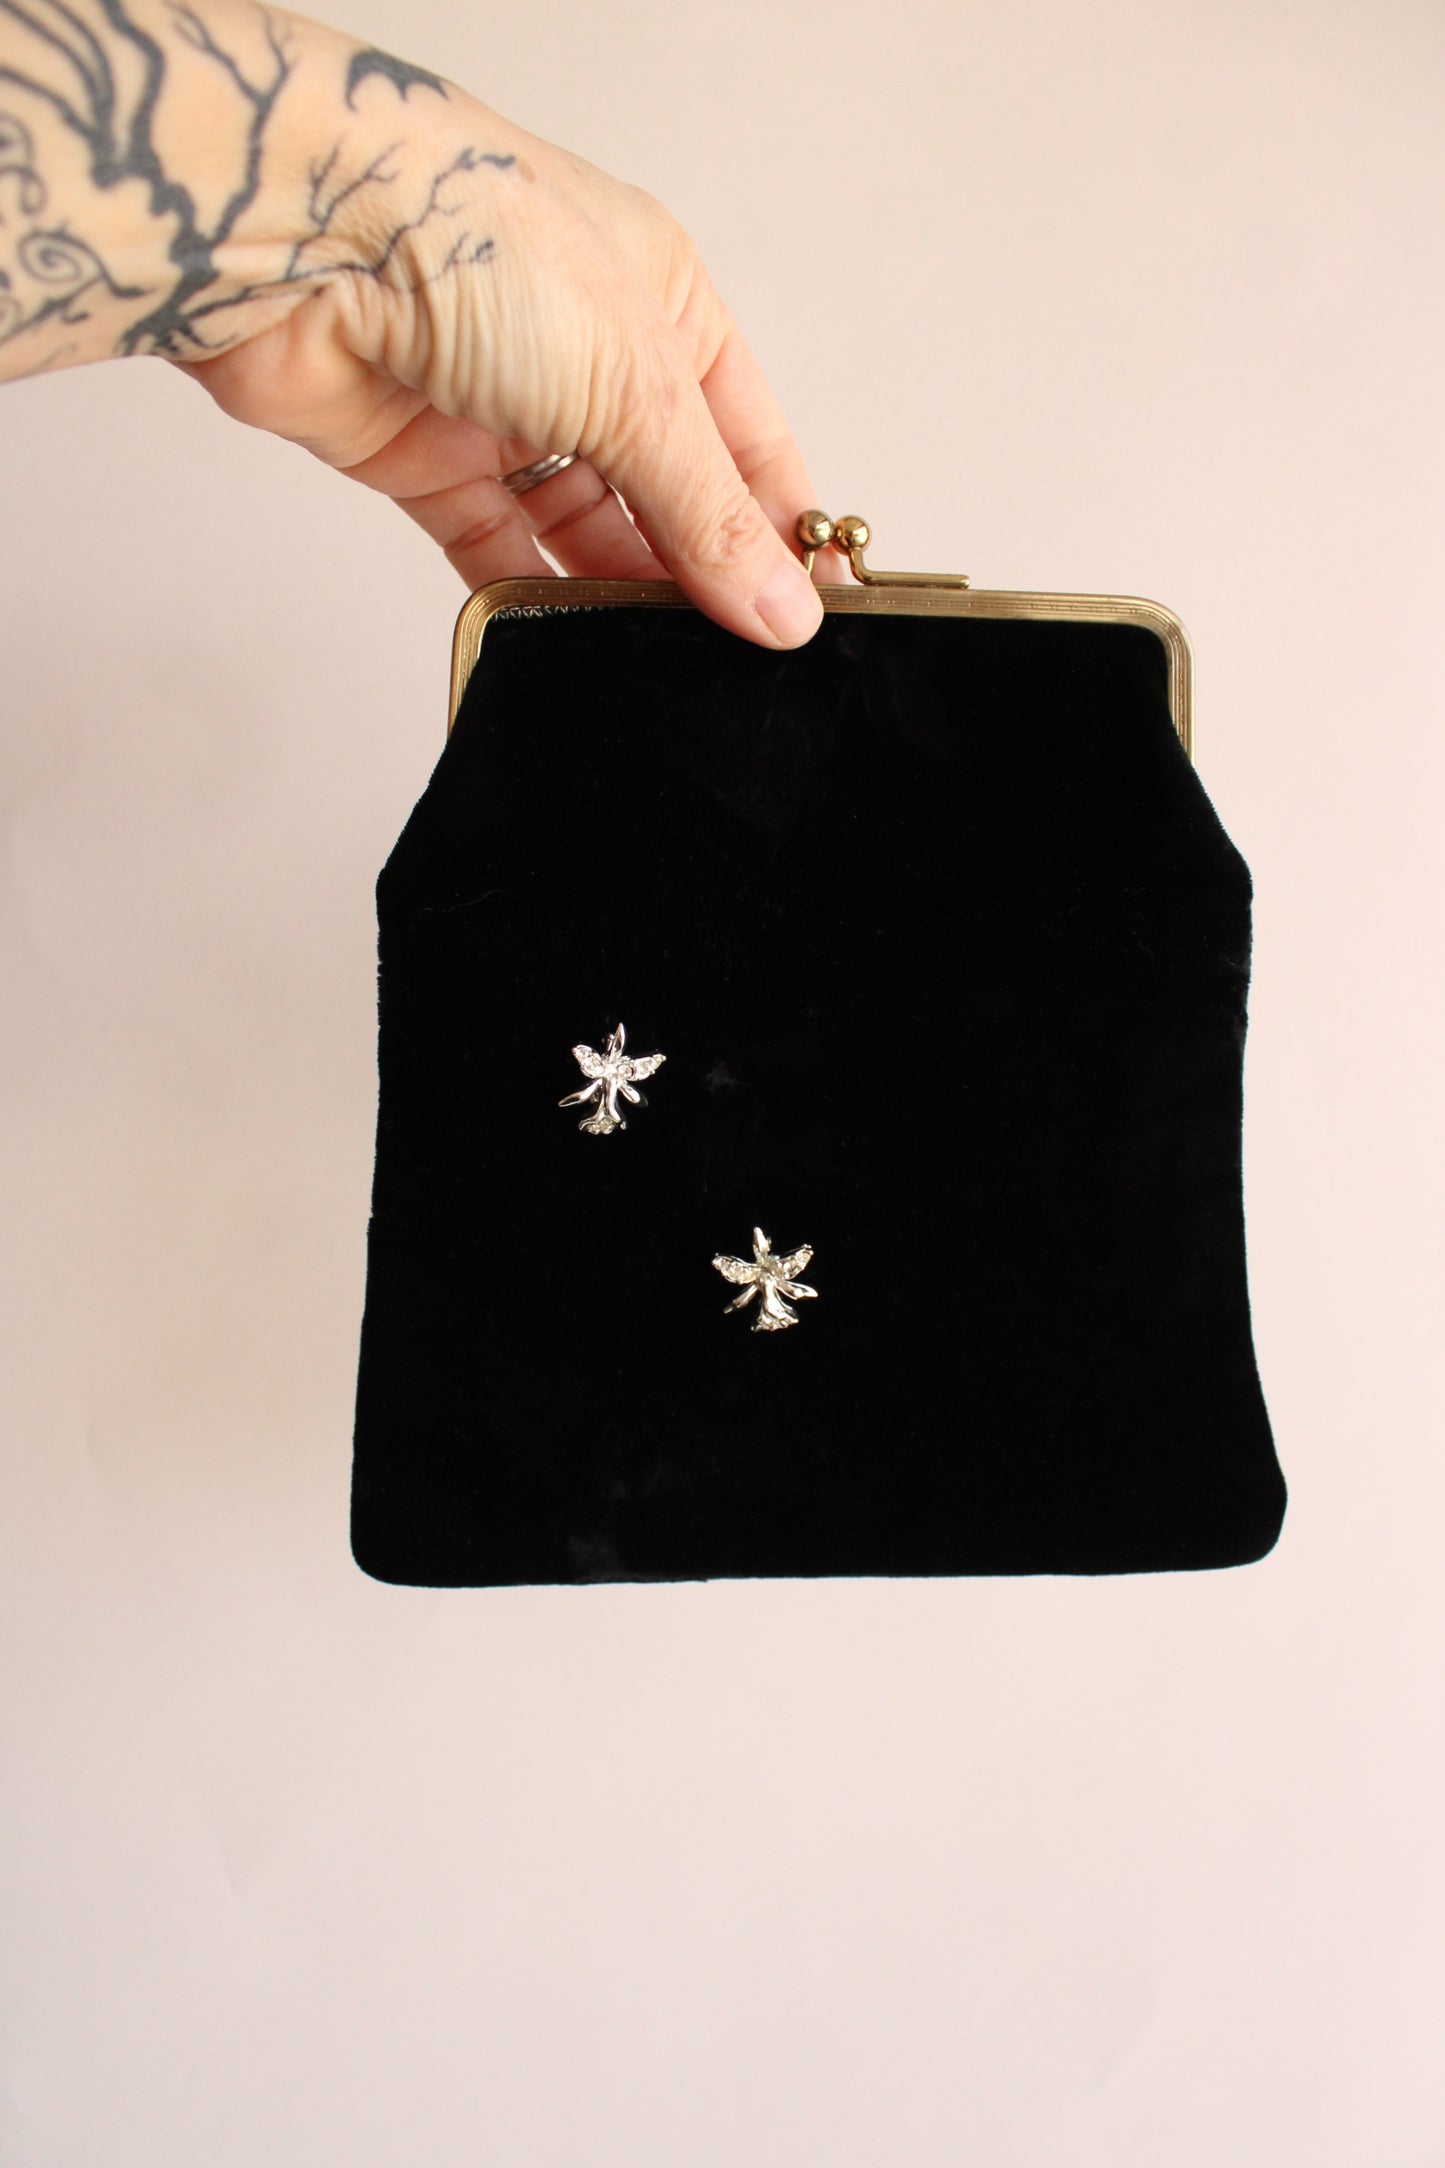 Vintage 1950s Black Velvet Clutch Purse With Rhinestone Flower Brooches And Pink Satin Lining